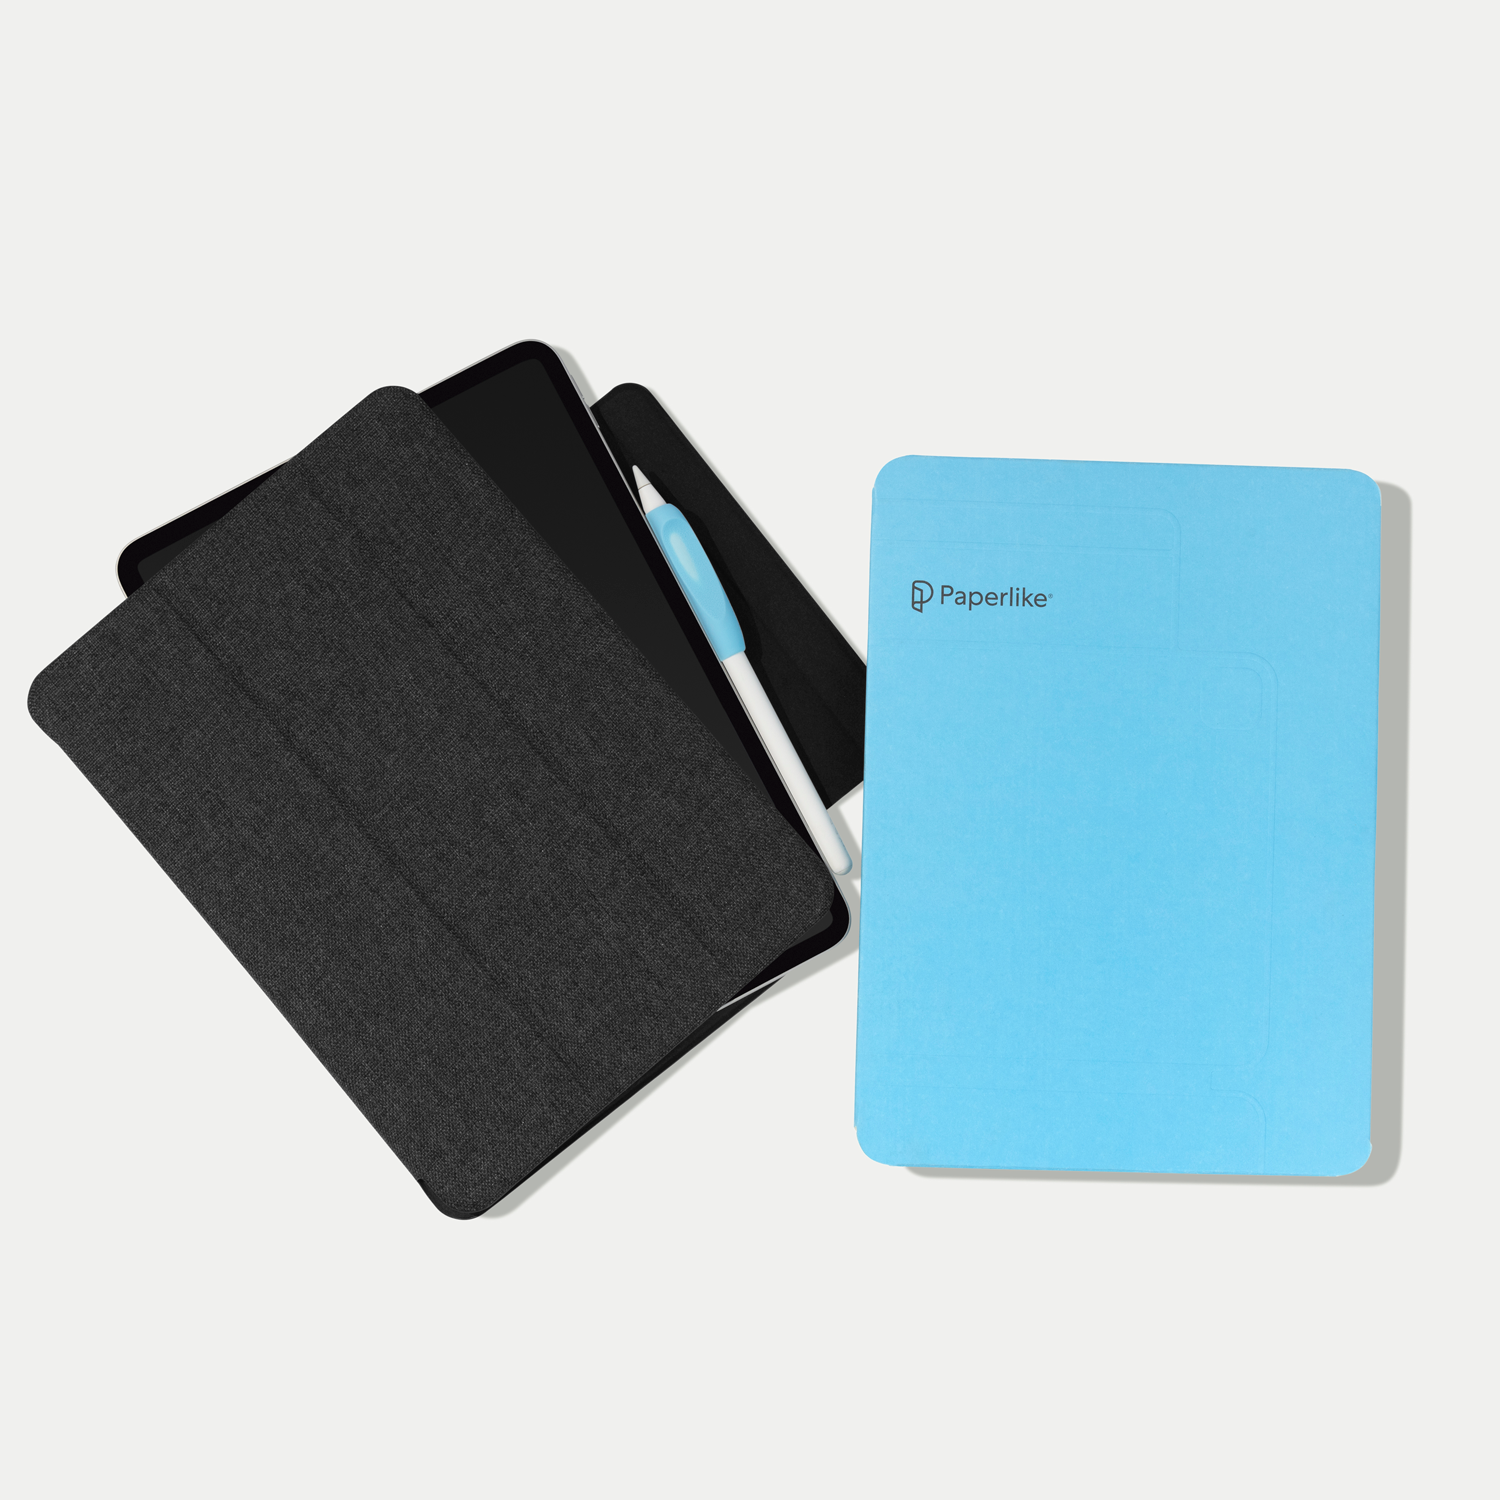 Paperlike's Folio Case for iPad made with recycled microfiber lining.